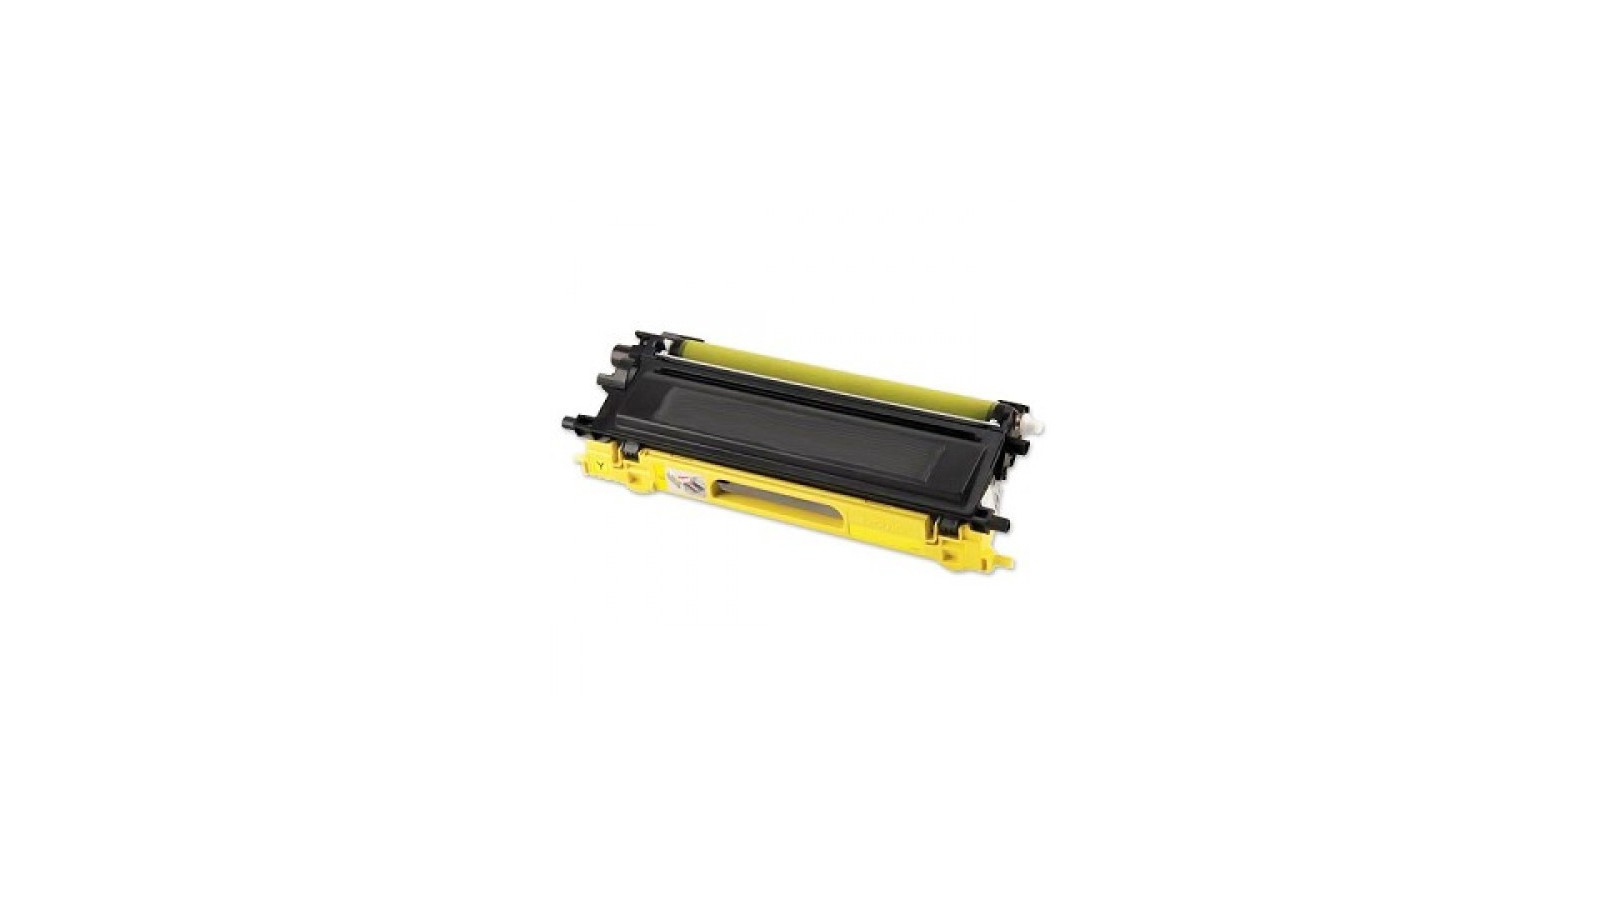 Toner per Brother HL-3045CN HL-3075CW MFC-9125CN MFC-9325CW Yellow 1400 Pagine